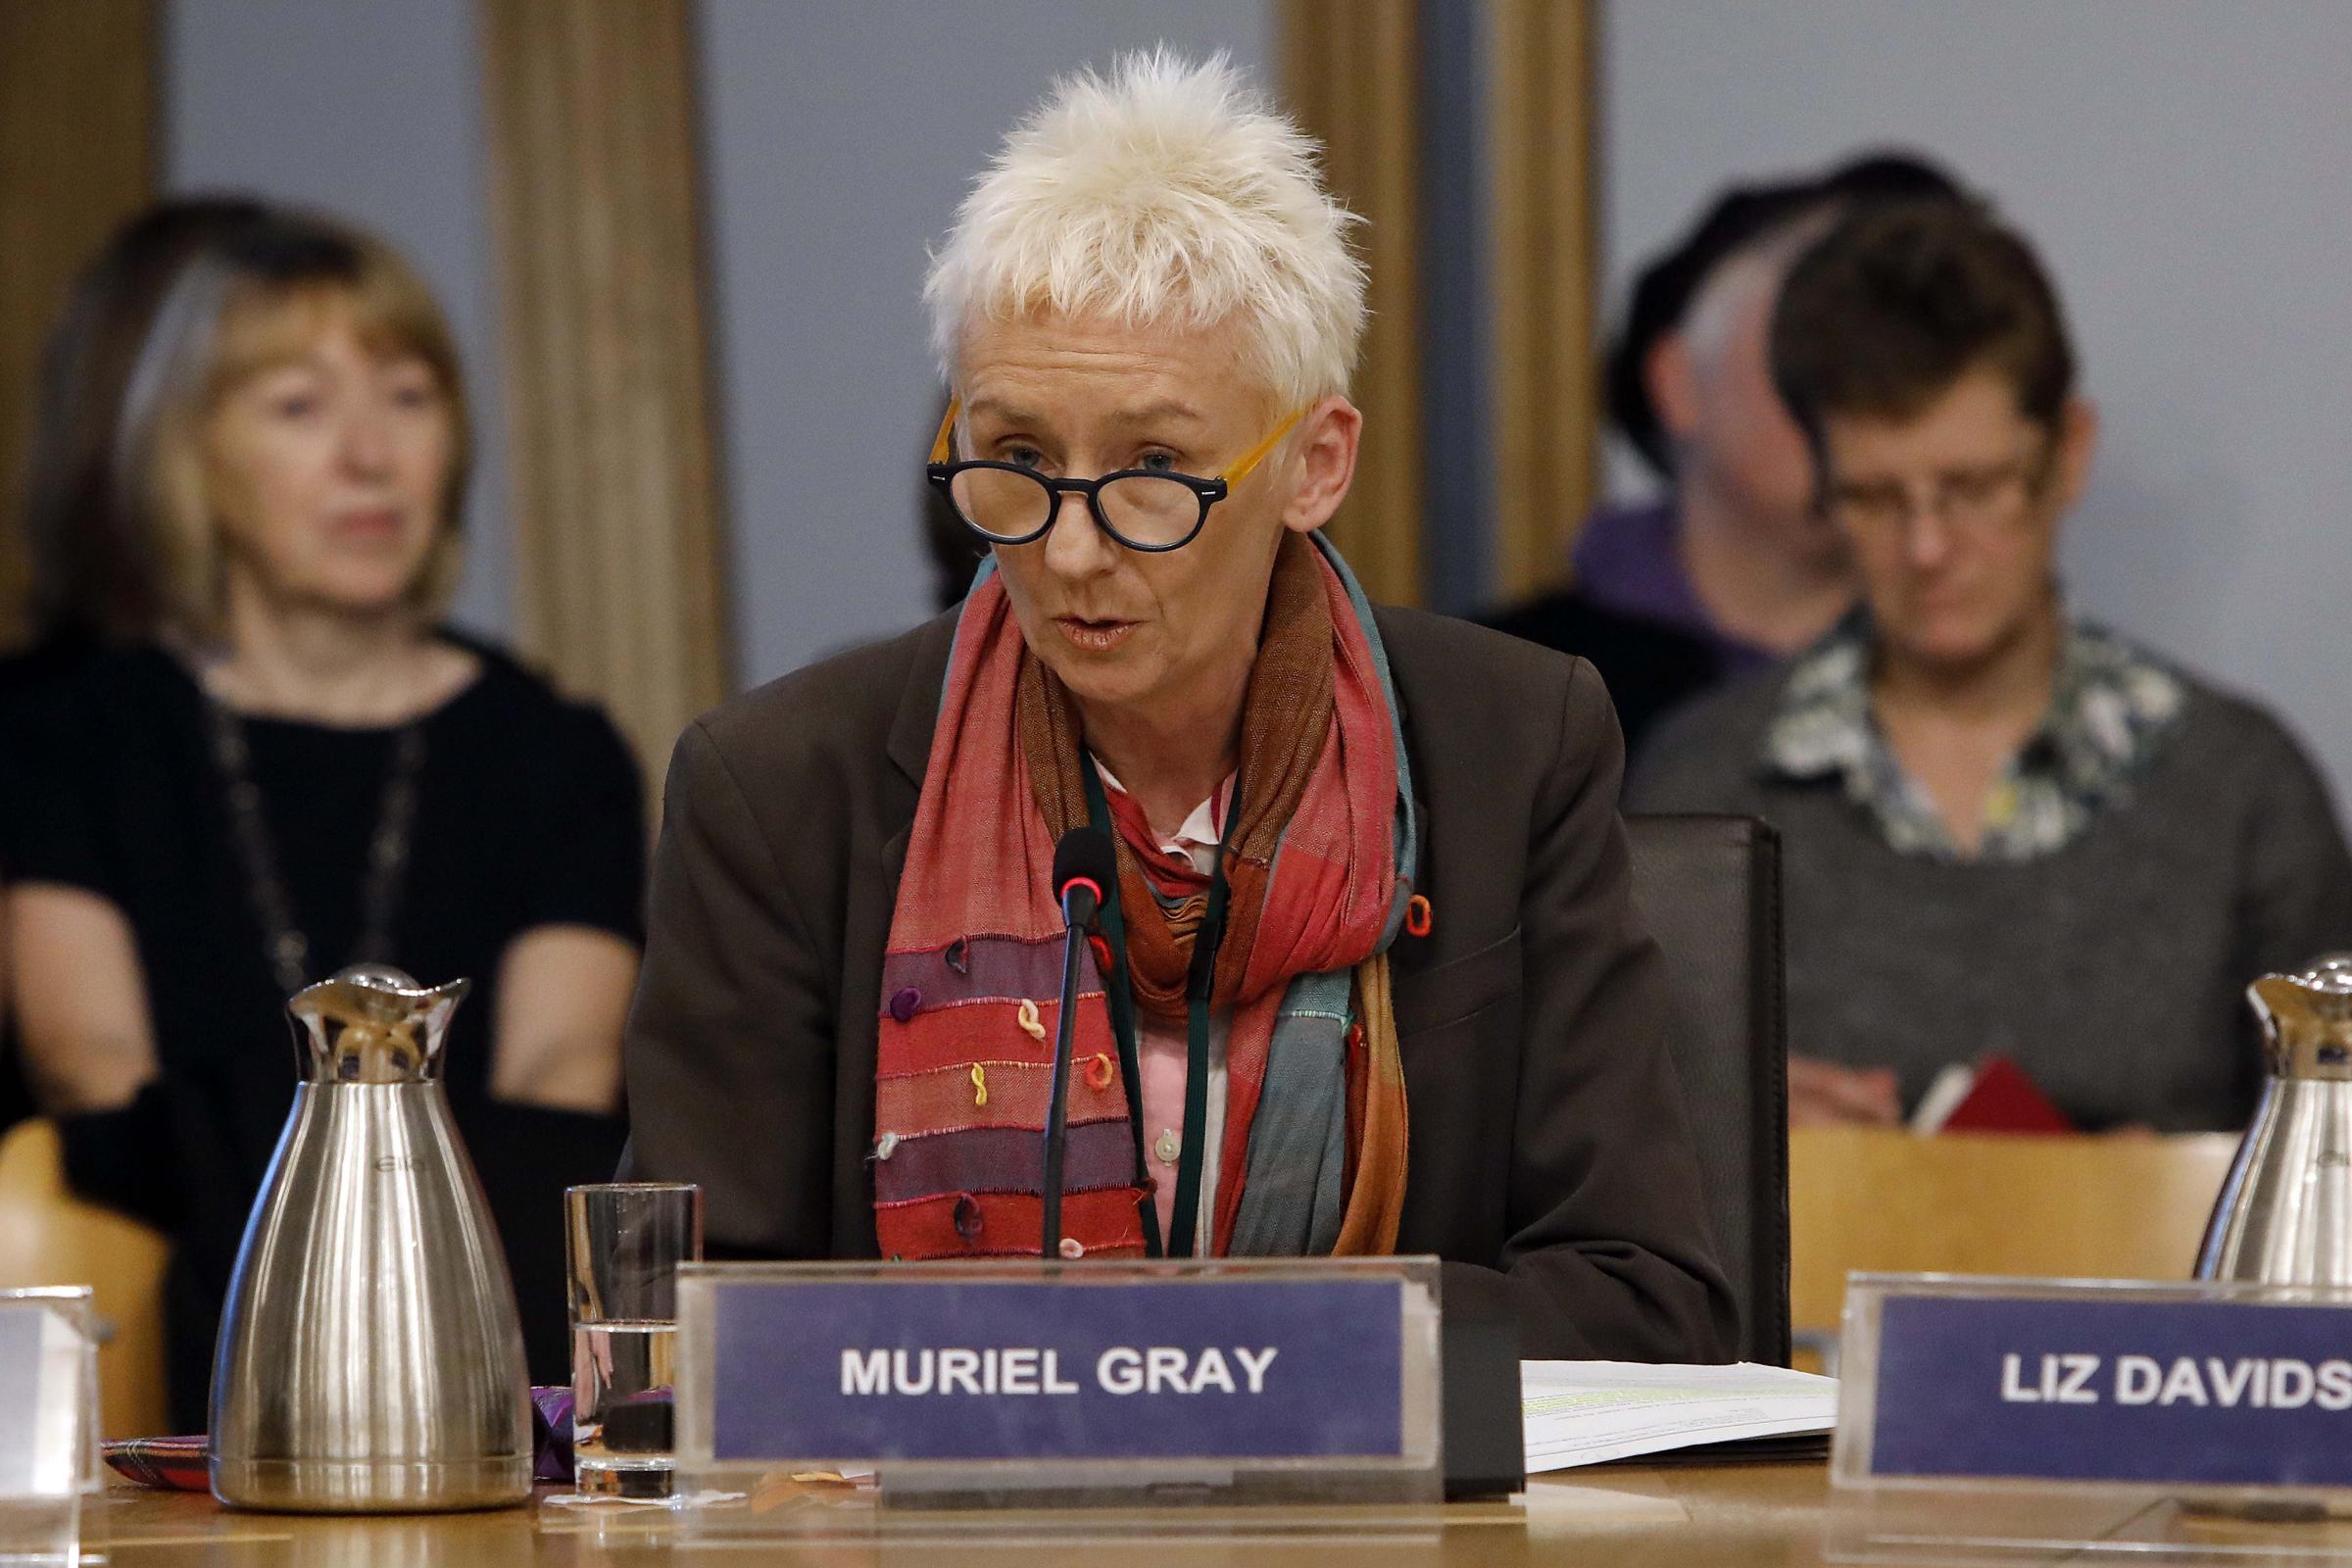 Muriel Gray stepped down as chairman last year